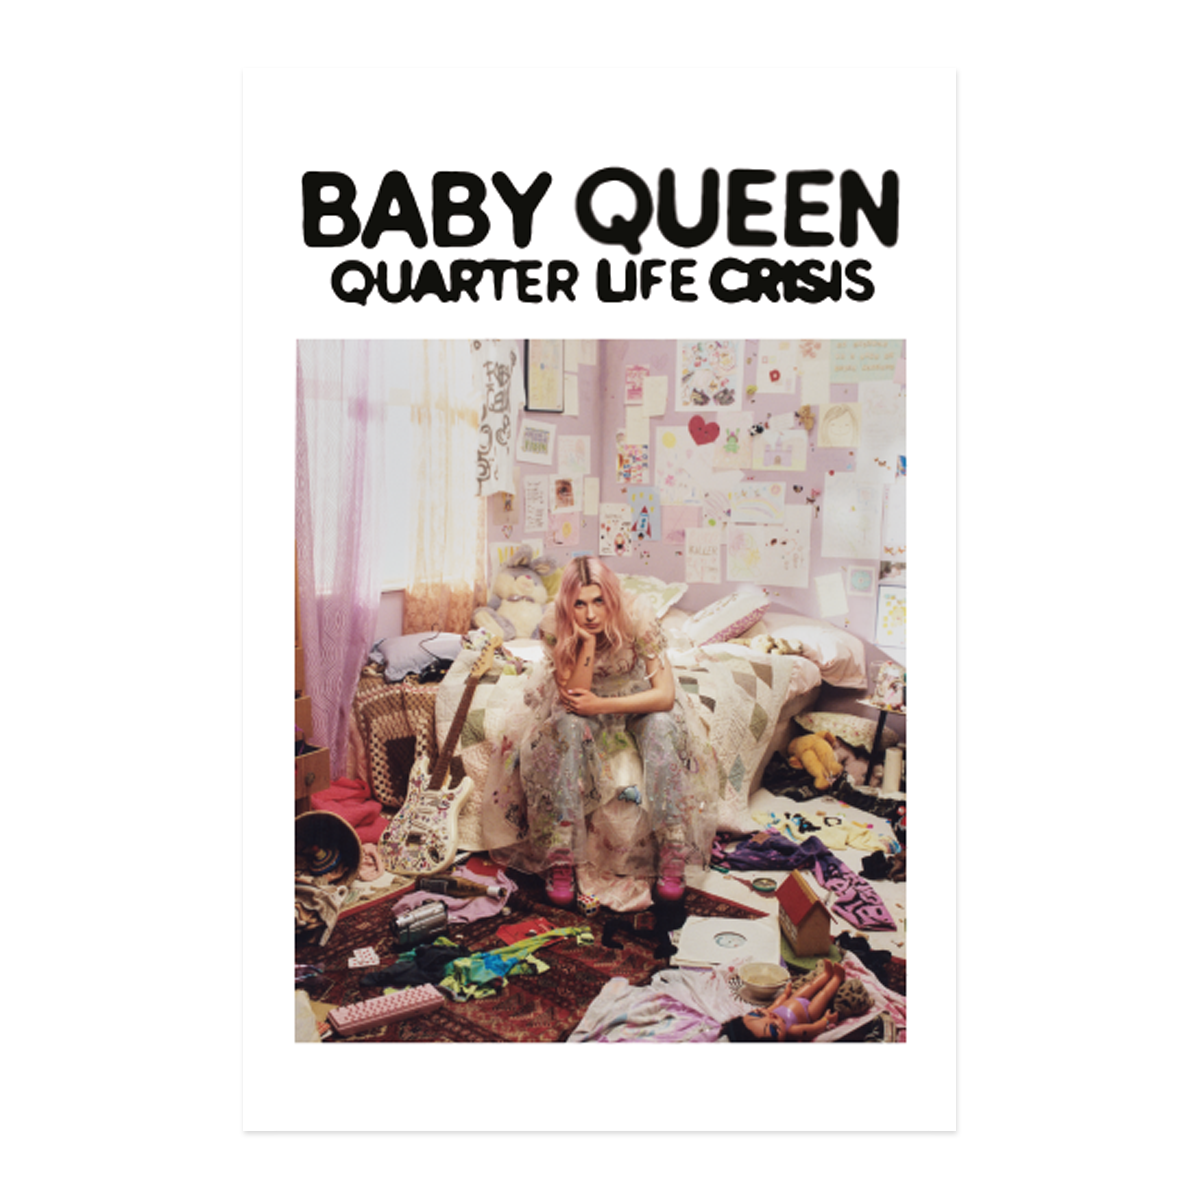 baby queen - Quarter Life Crisis Unsigned Poster #1